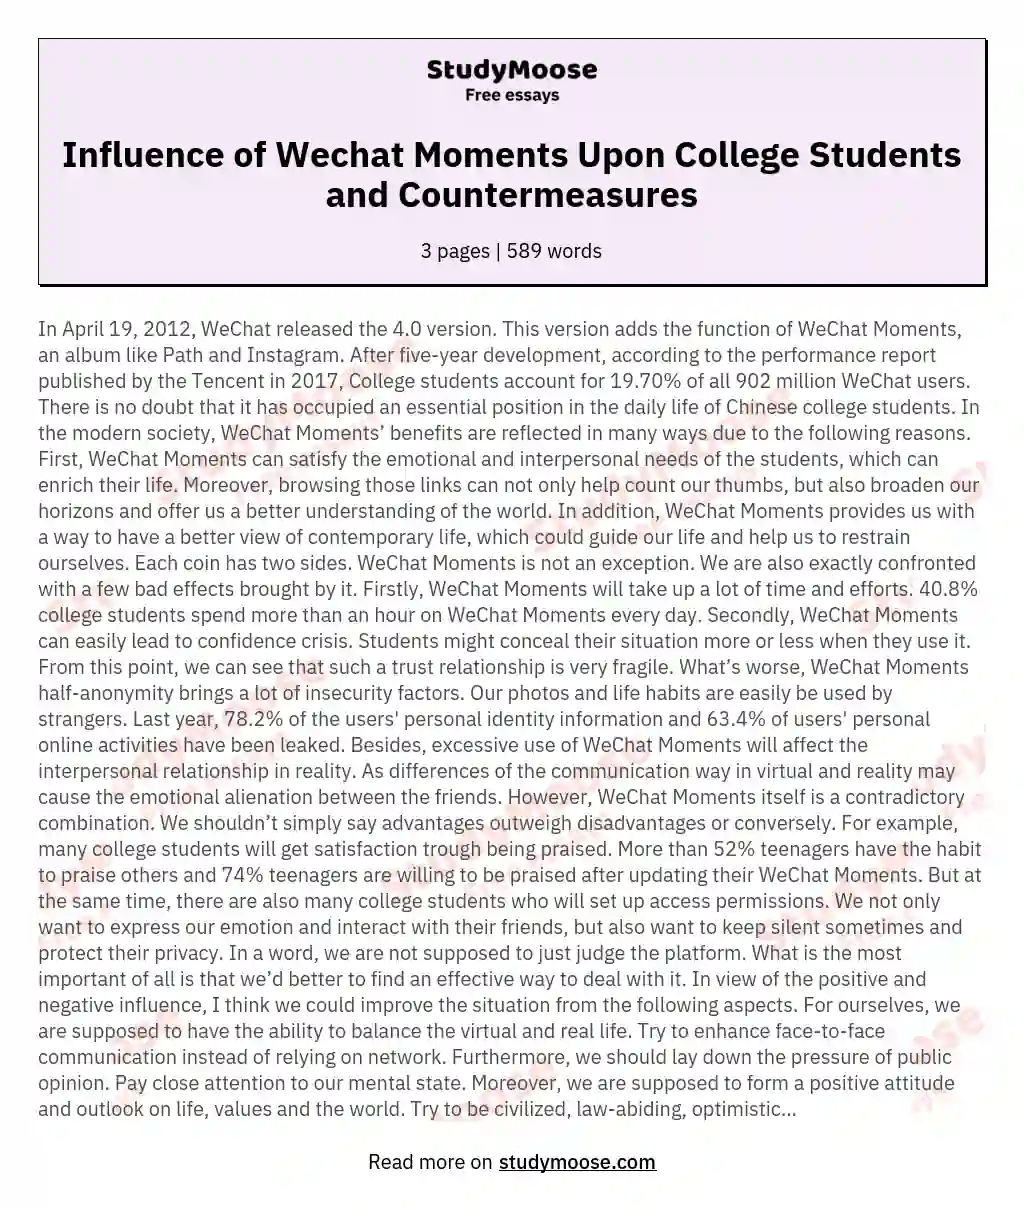 Influence of Wechat Moments Upon College Students and Countermeasures essay